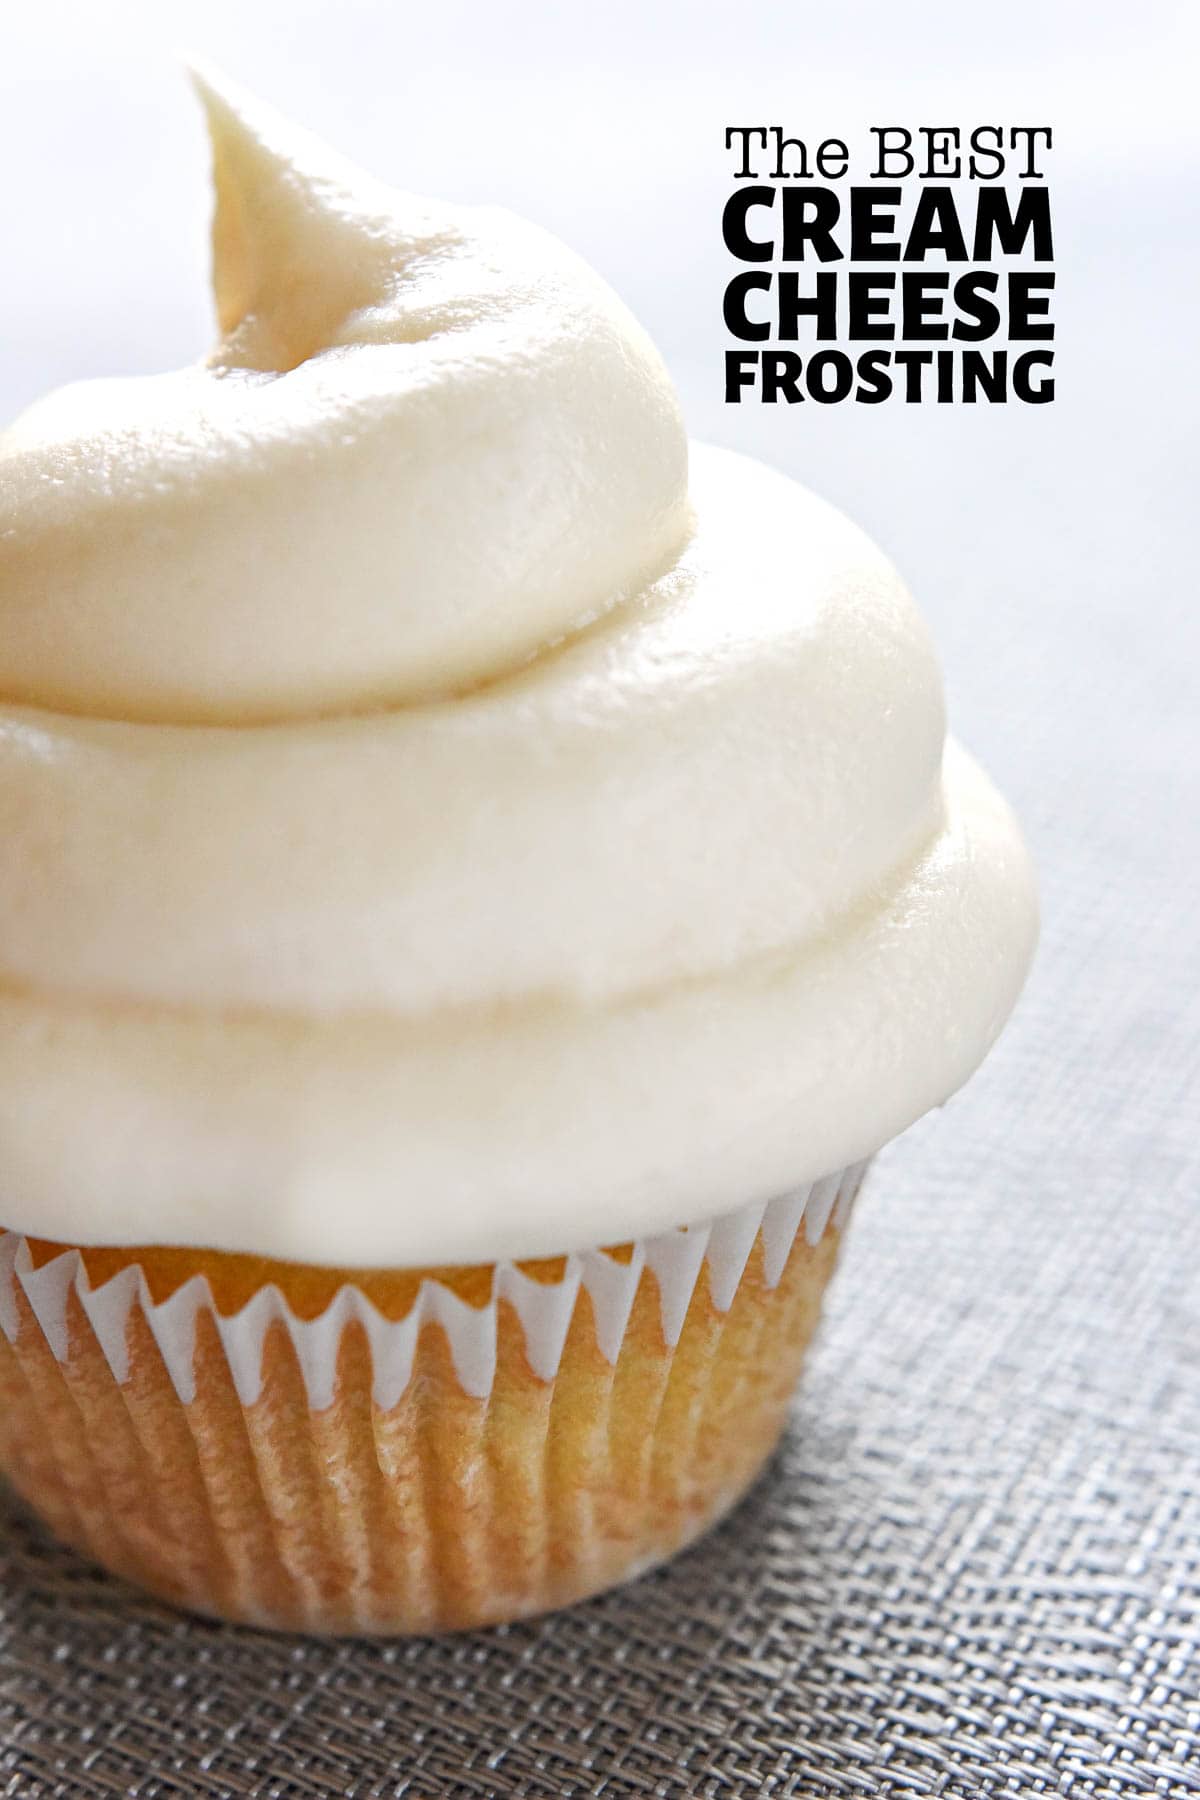 Cream Cheese Frosting with text overlay.